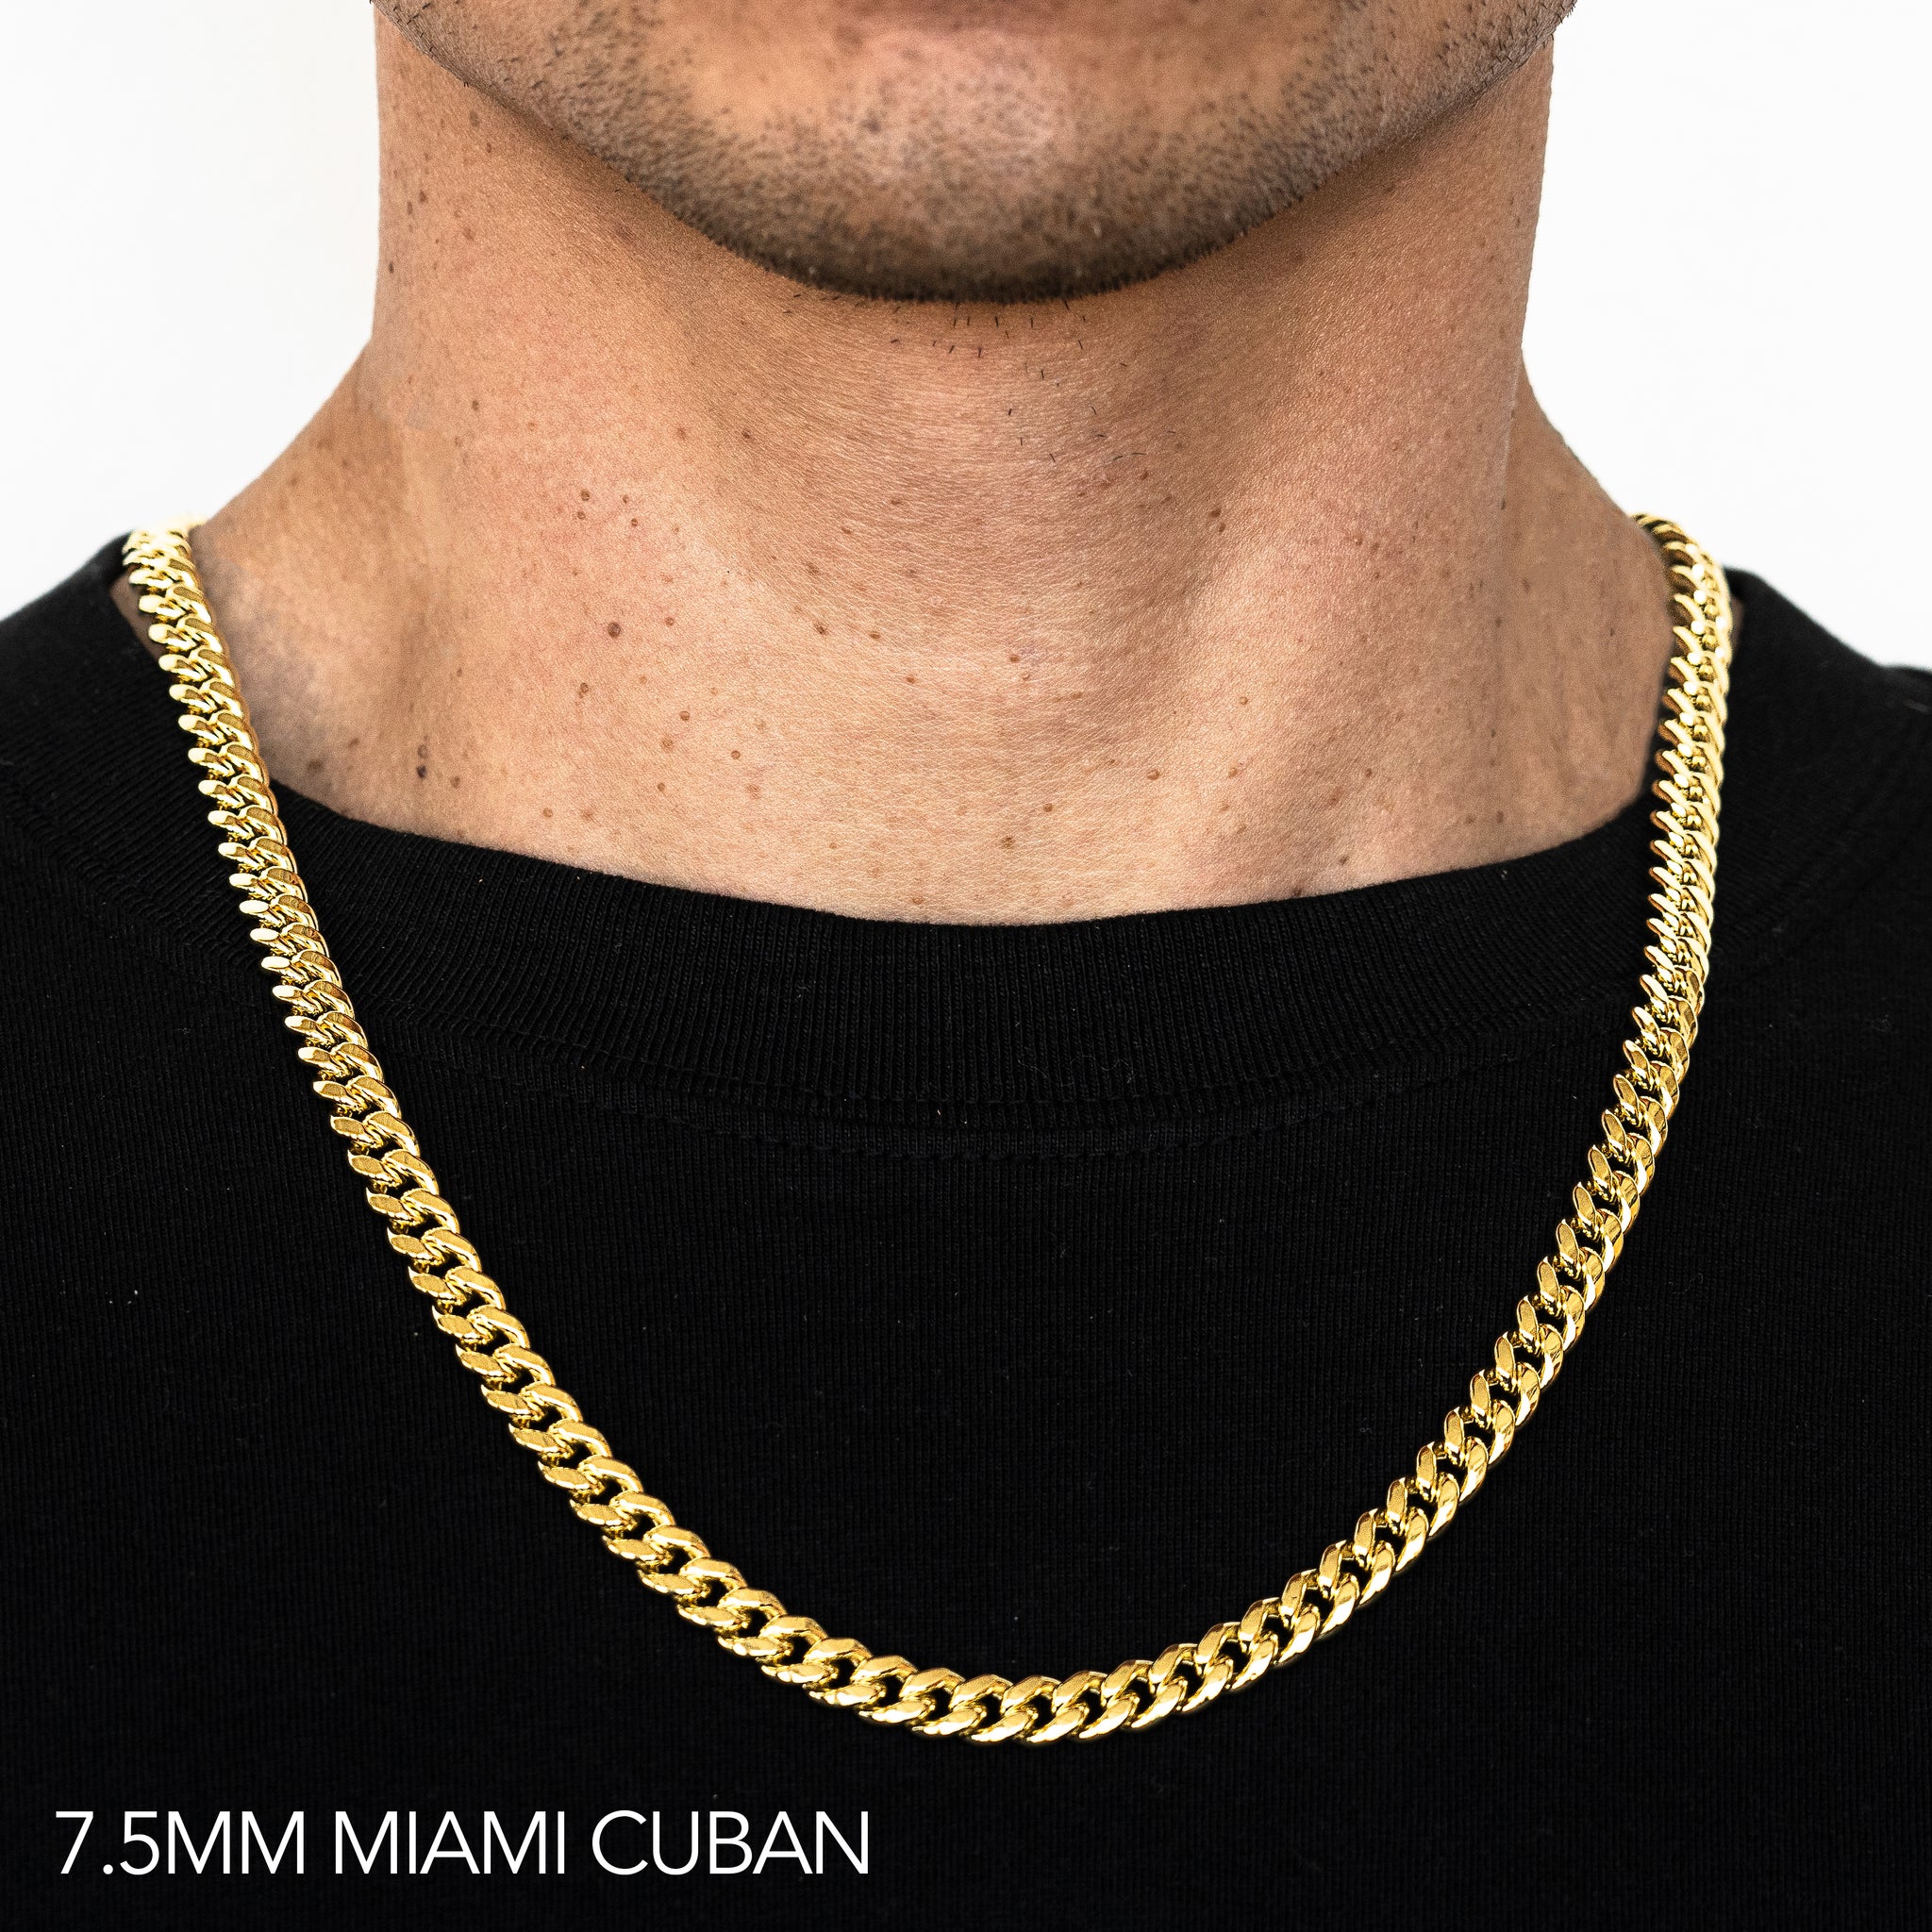 14K 7.5MM YELLOW GOLD HOLLOW MIAMI CUBAN 20 CHAIN NECKLACE"